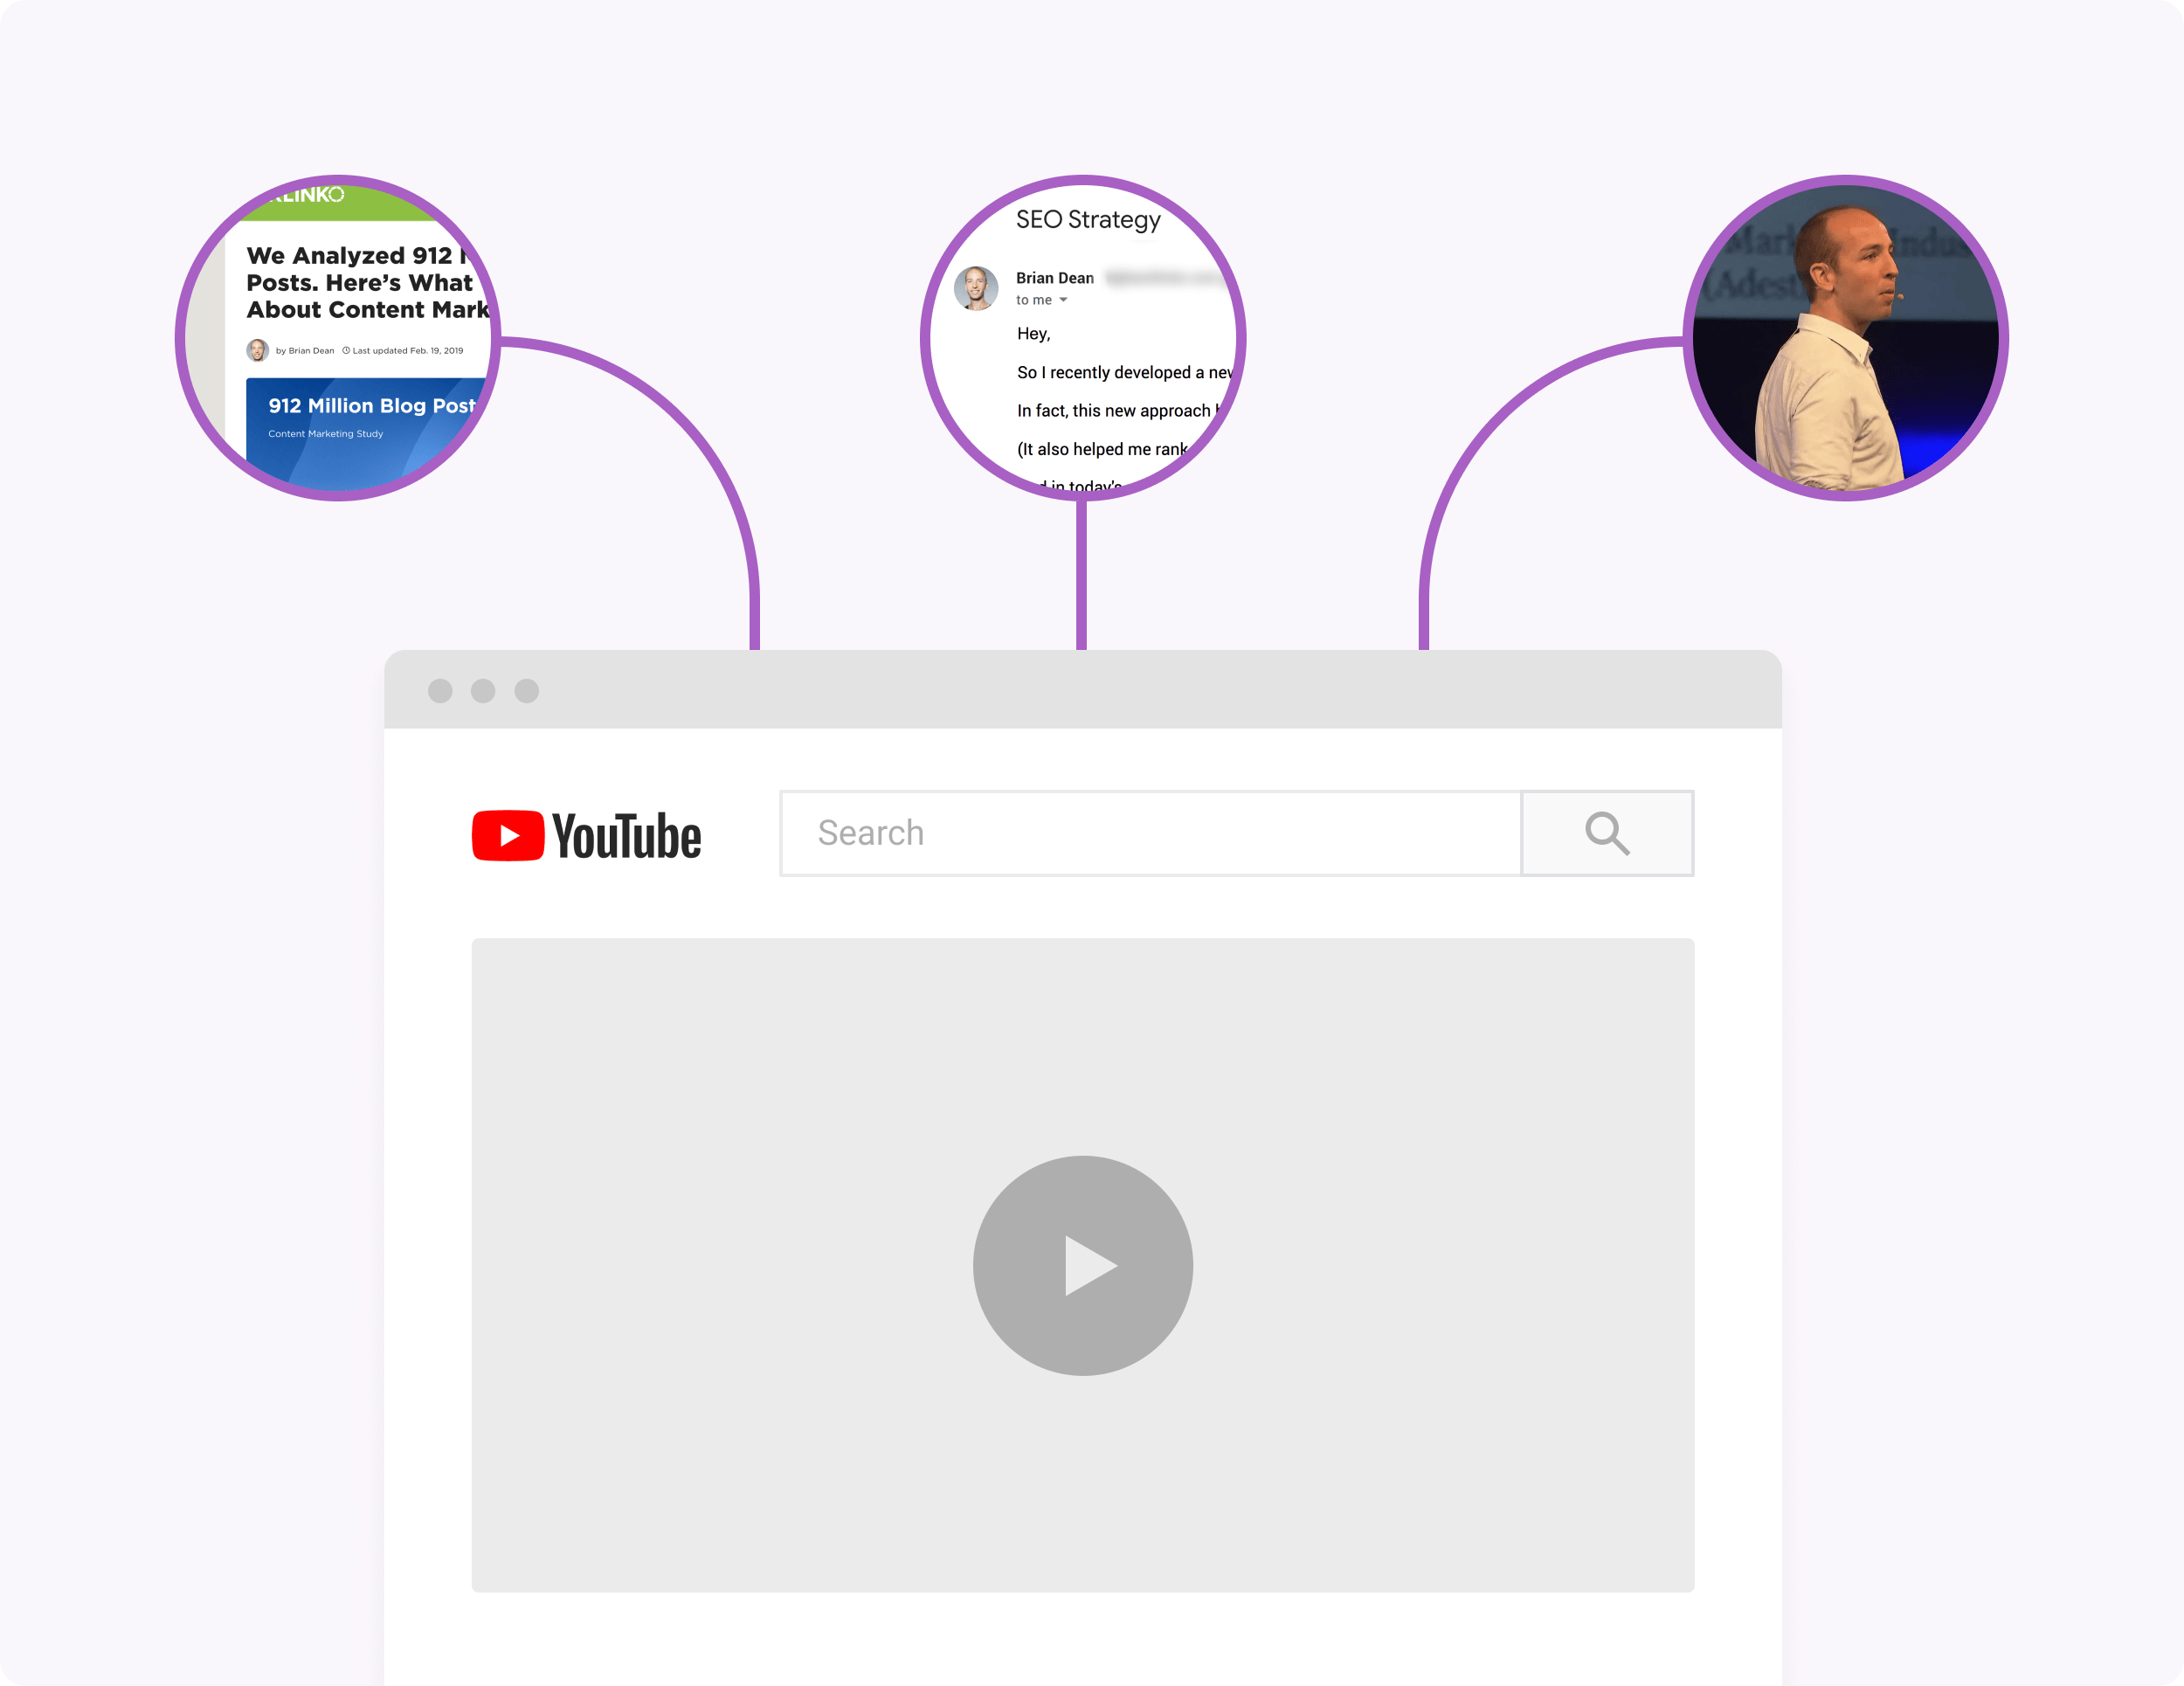 YouTube video content based on existing content